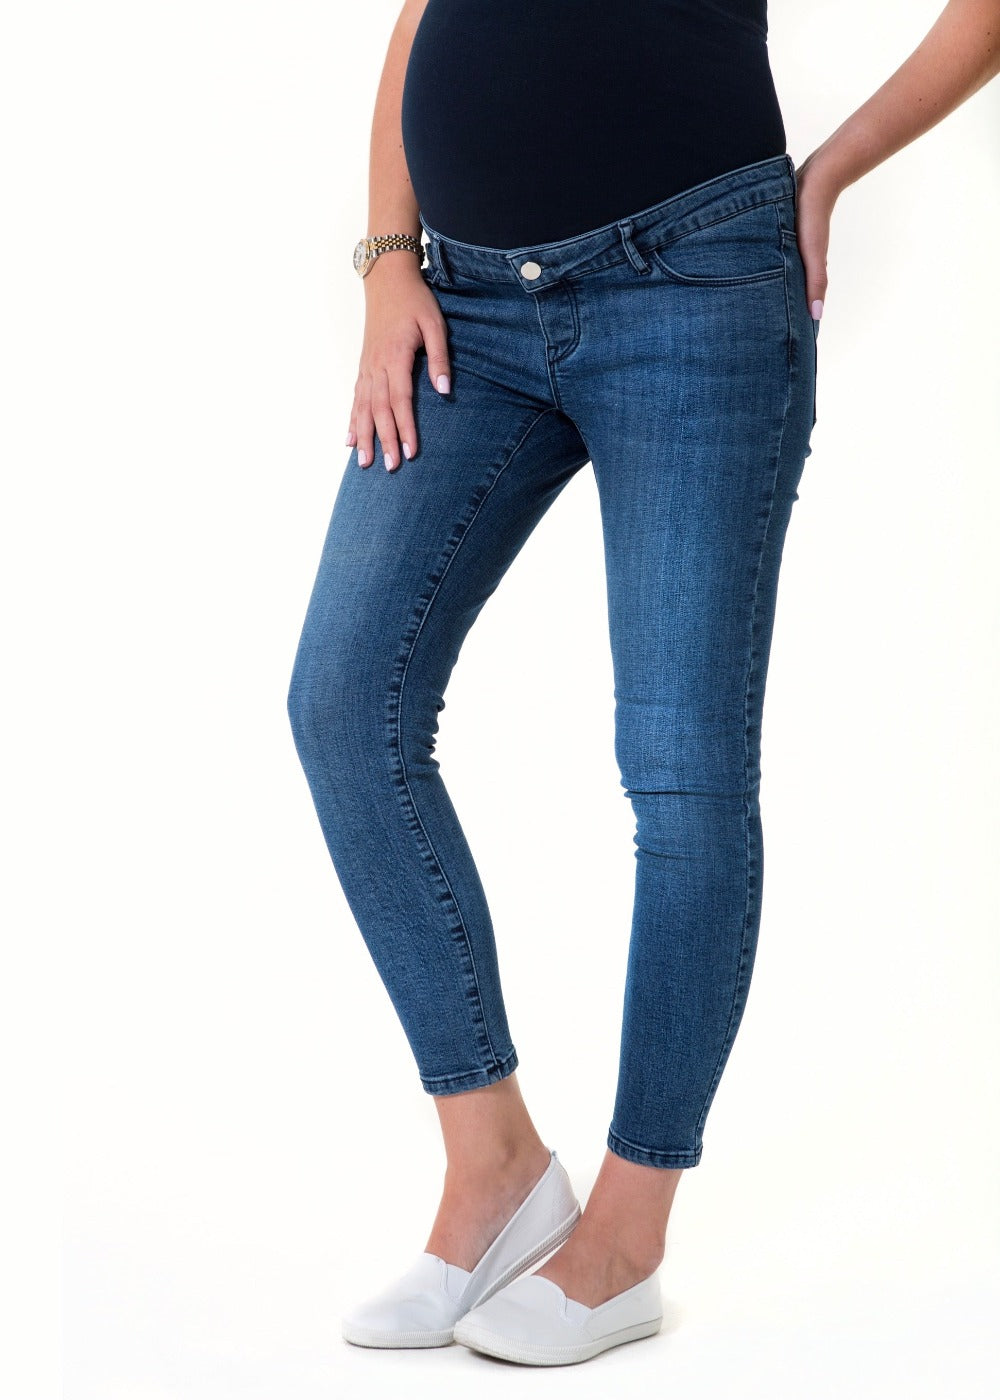 Over bump luxury maternity jeans, pregnancy skinny jeans, maternity pants, petite friendly.